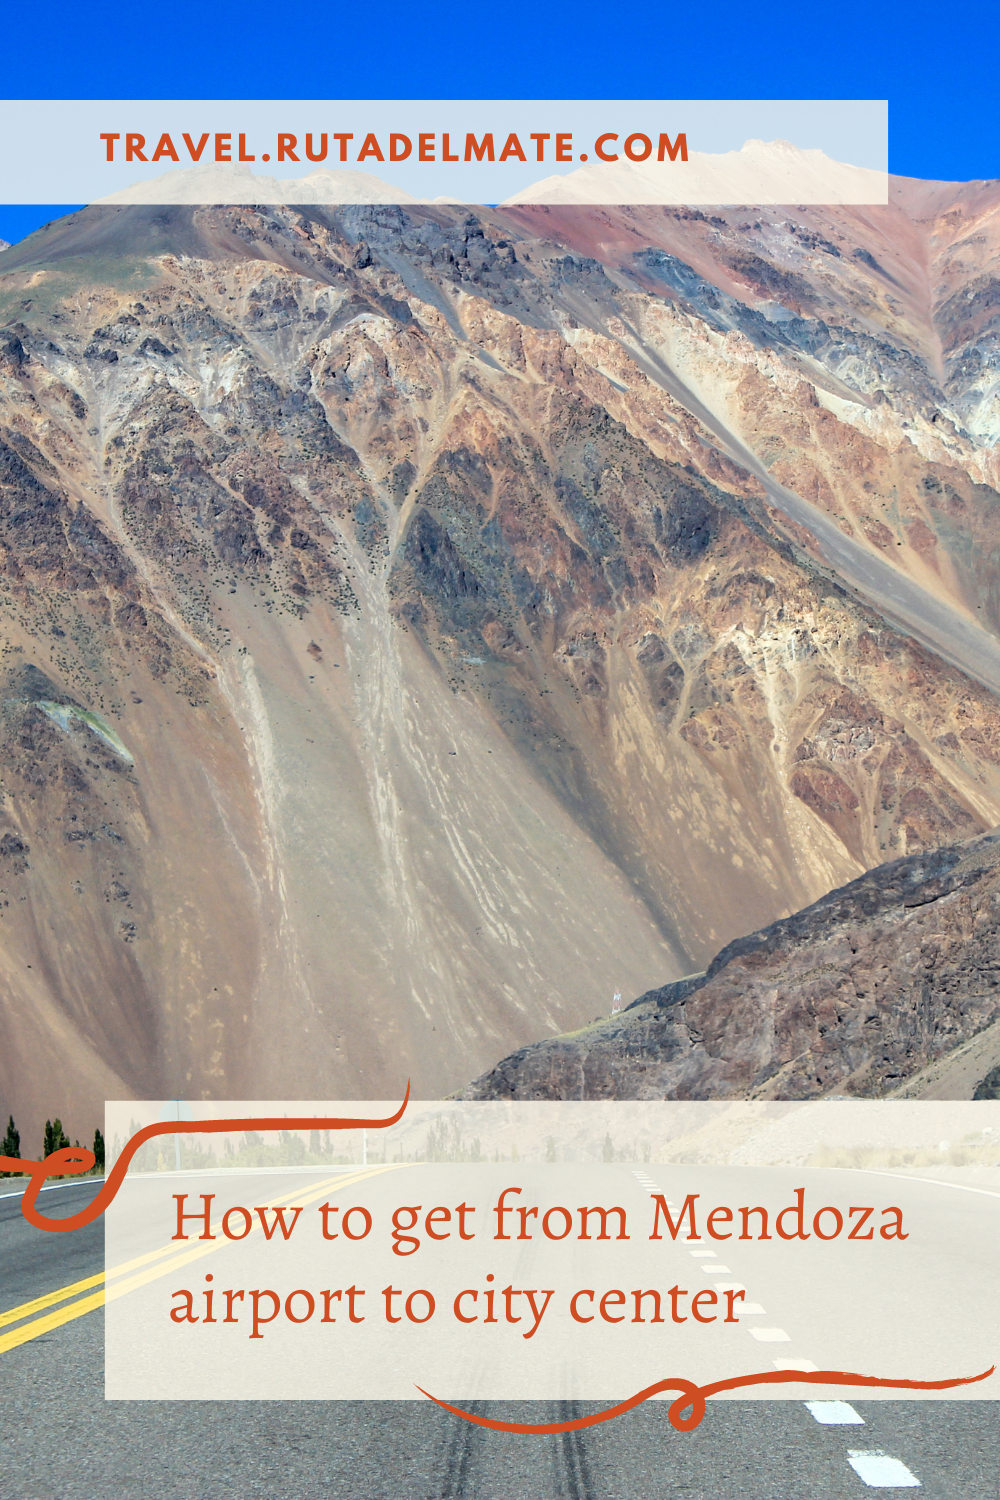 How to get from Mendoza airport to downtown